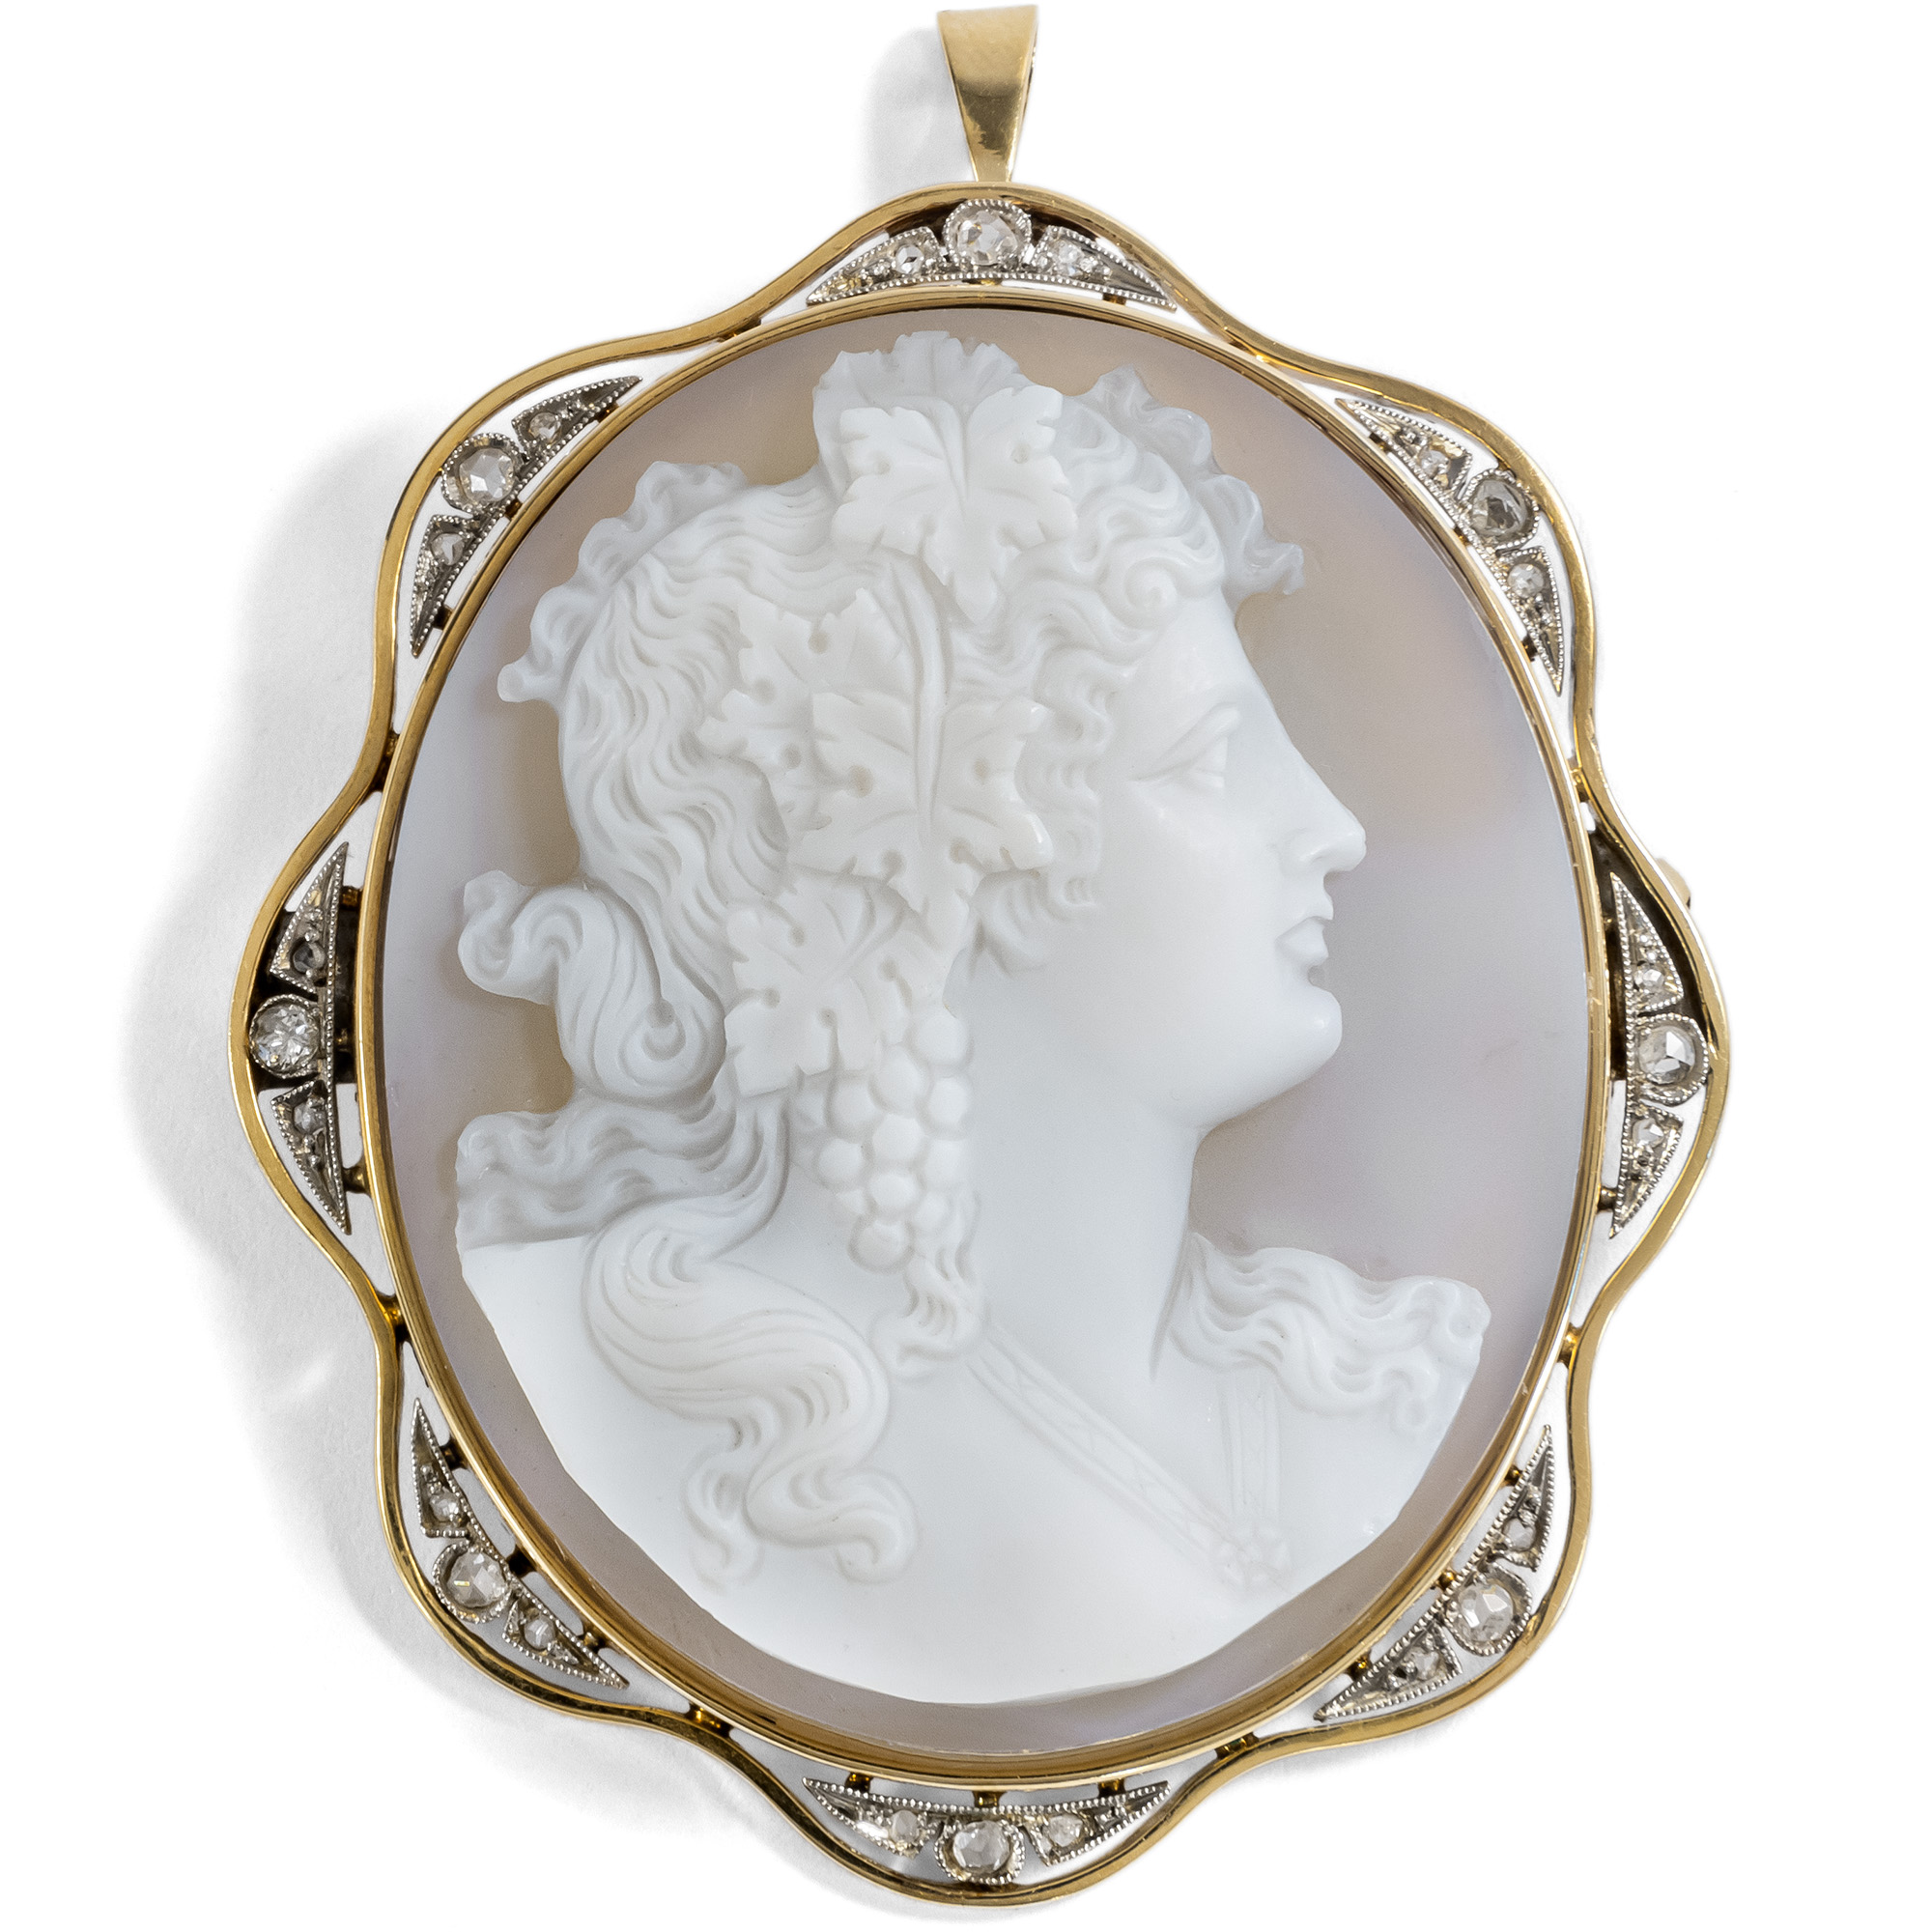 Fabulous Antique Agate Cameo as Brooch & Pendant, Circa 1880 & Later